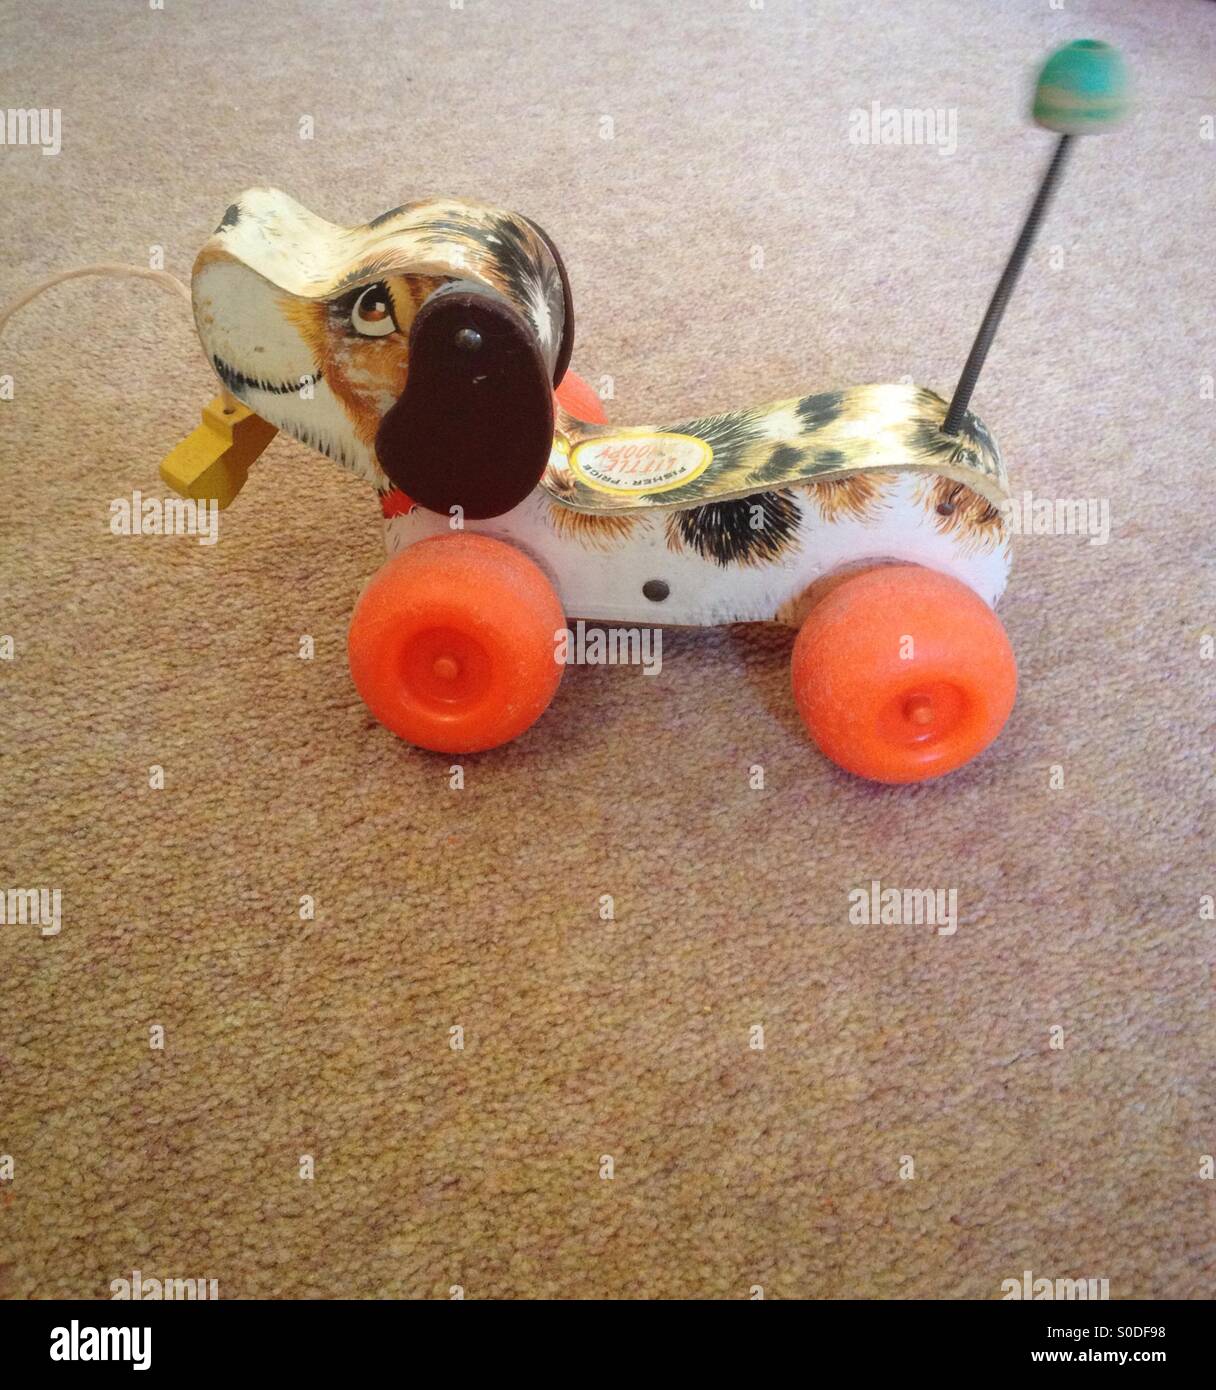 70's pull along puppy toy Stock Photo - Alamy